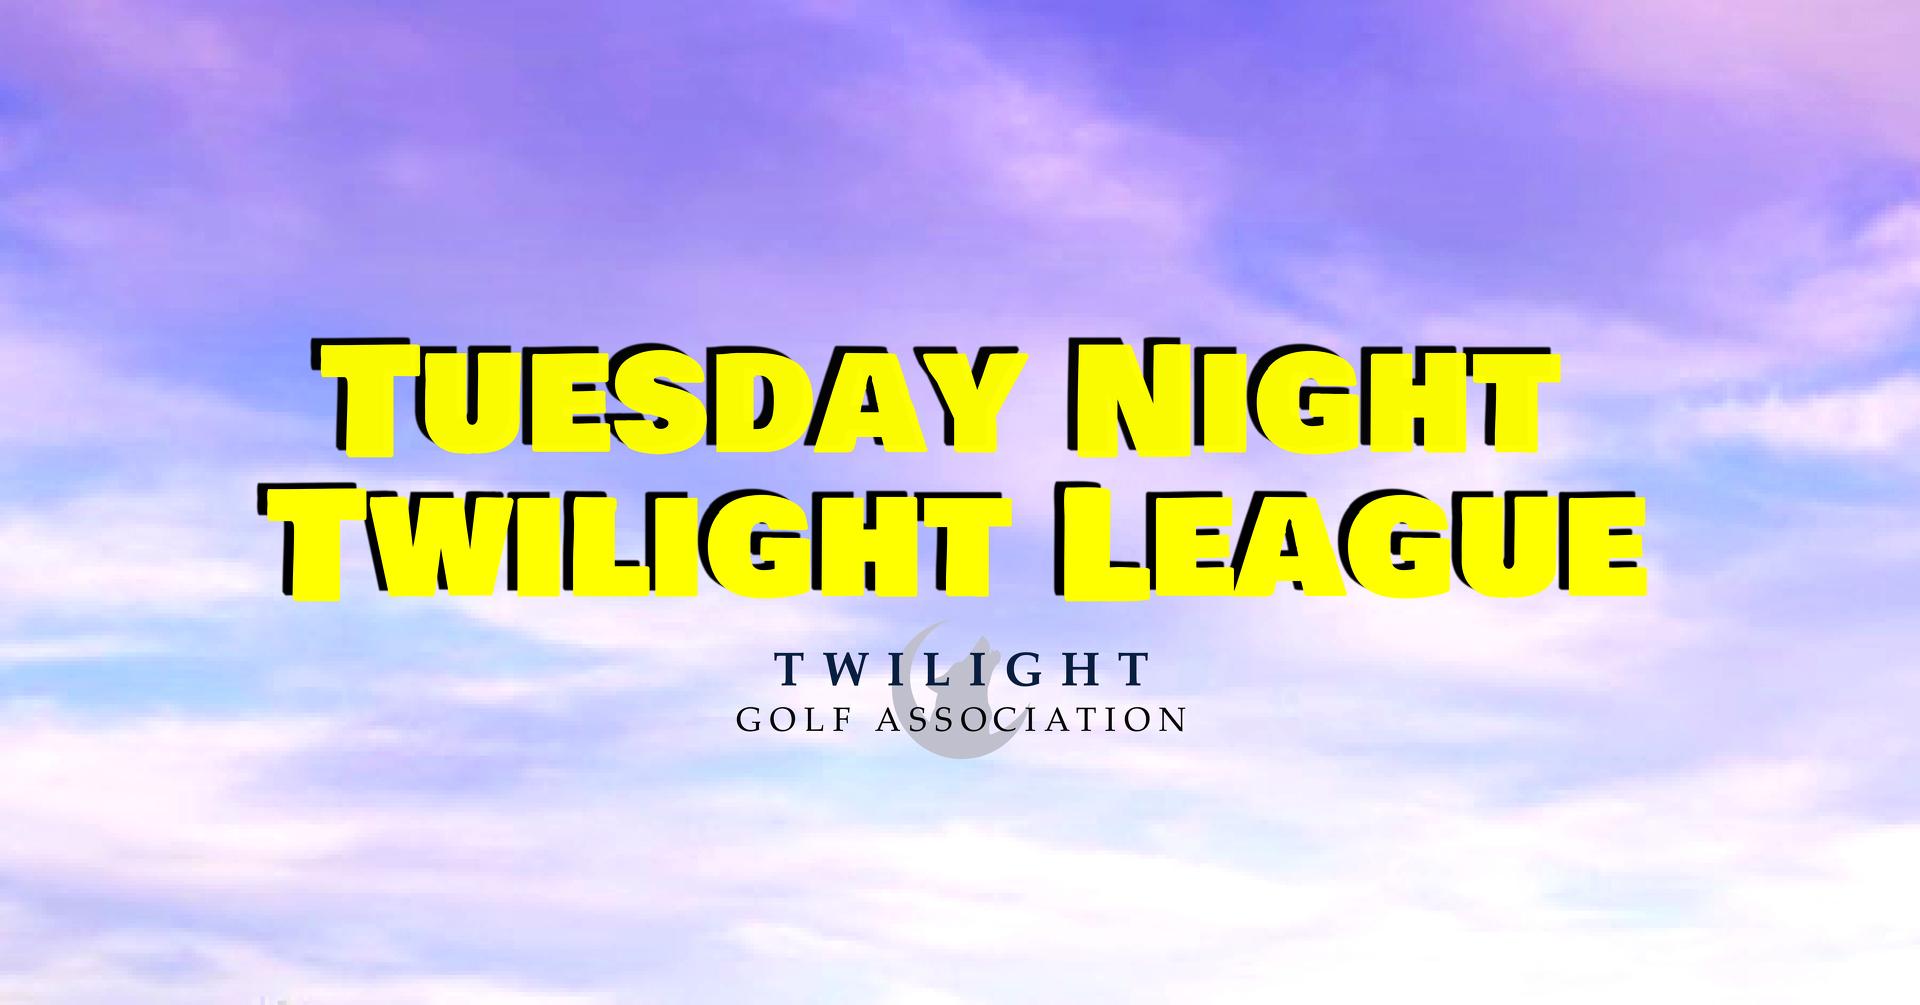 Tuesday Twilight League at Waterford Golf Club